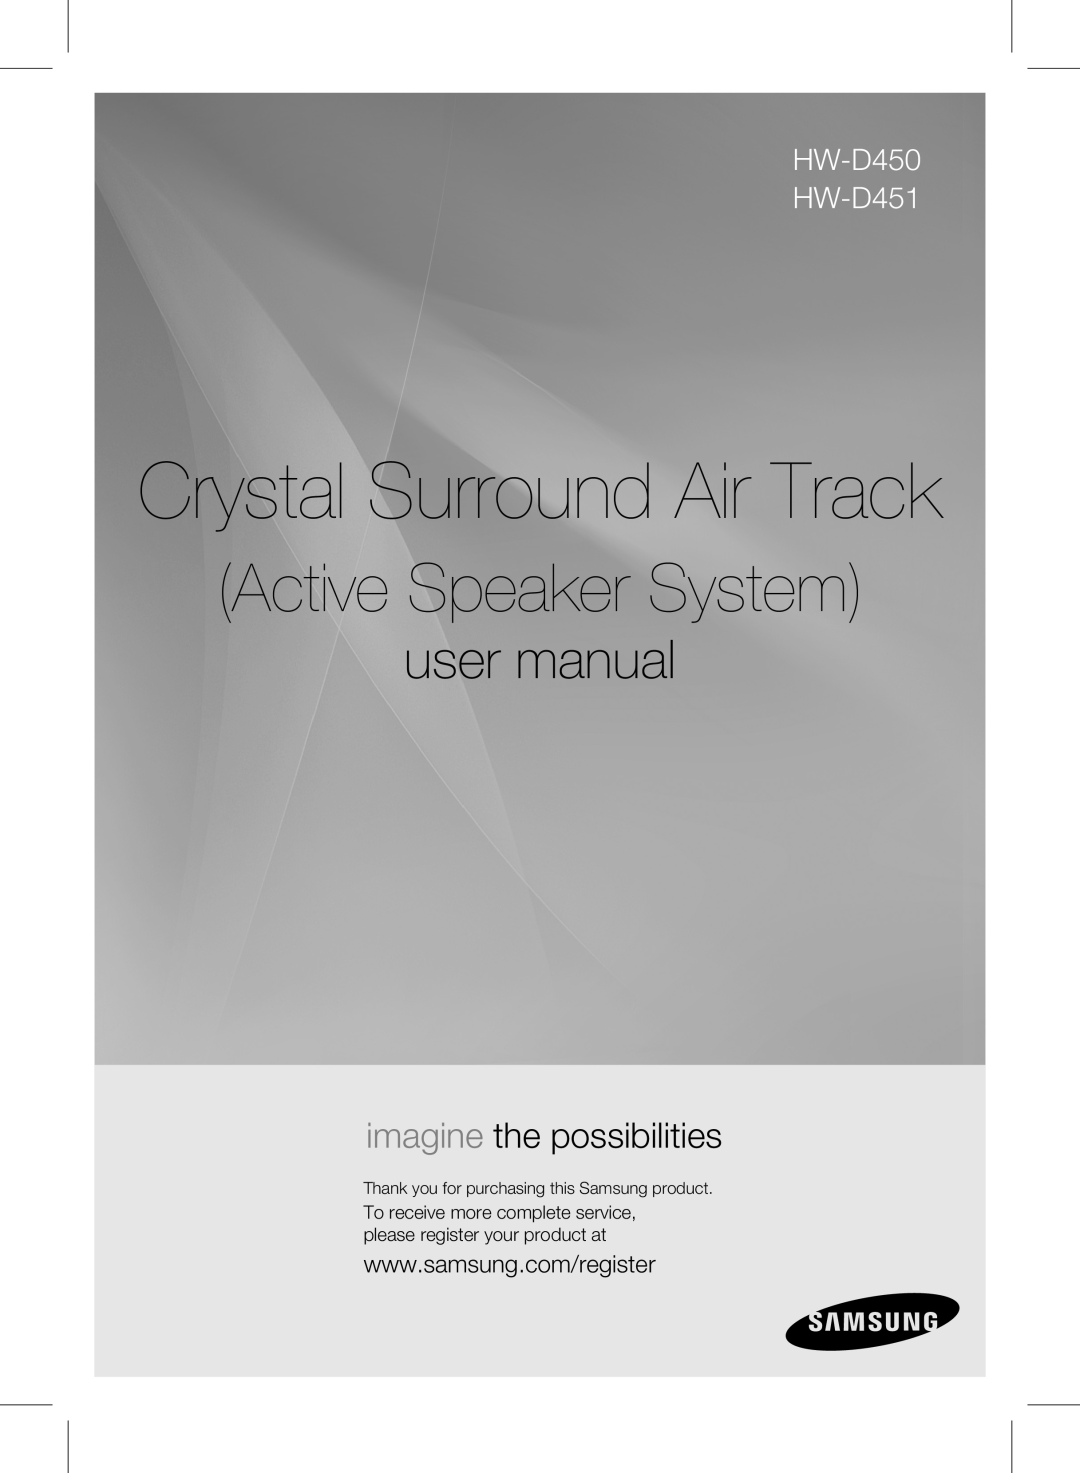 Siemens user manual Crystal Surround Air Track, Active Speaker System, imagine the possibilities, HW-D450 HW-D451 